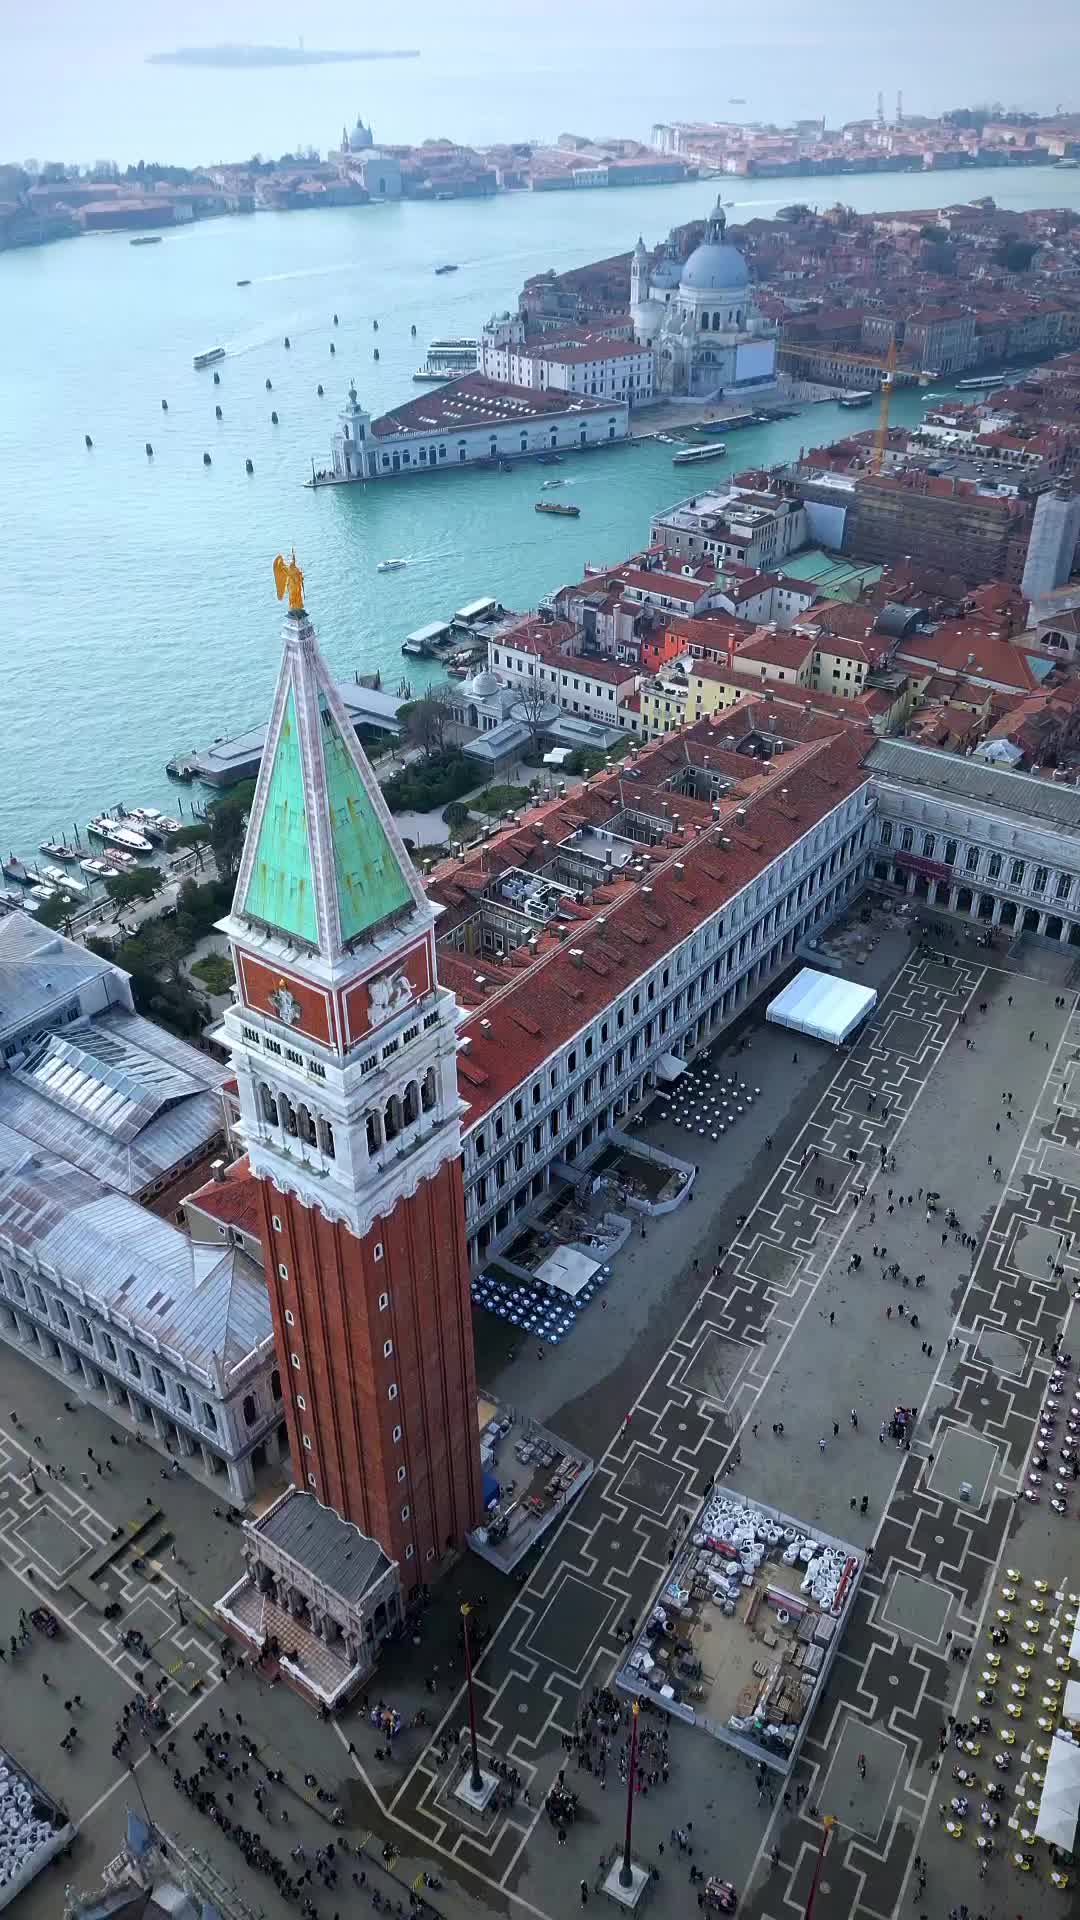 Discover Piazza San Marco in Venice, Italy 🇮🇹